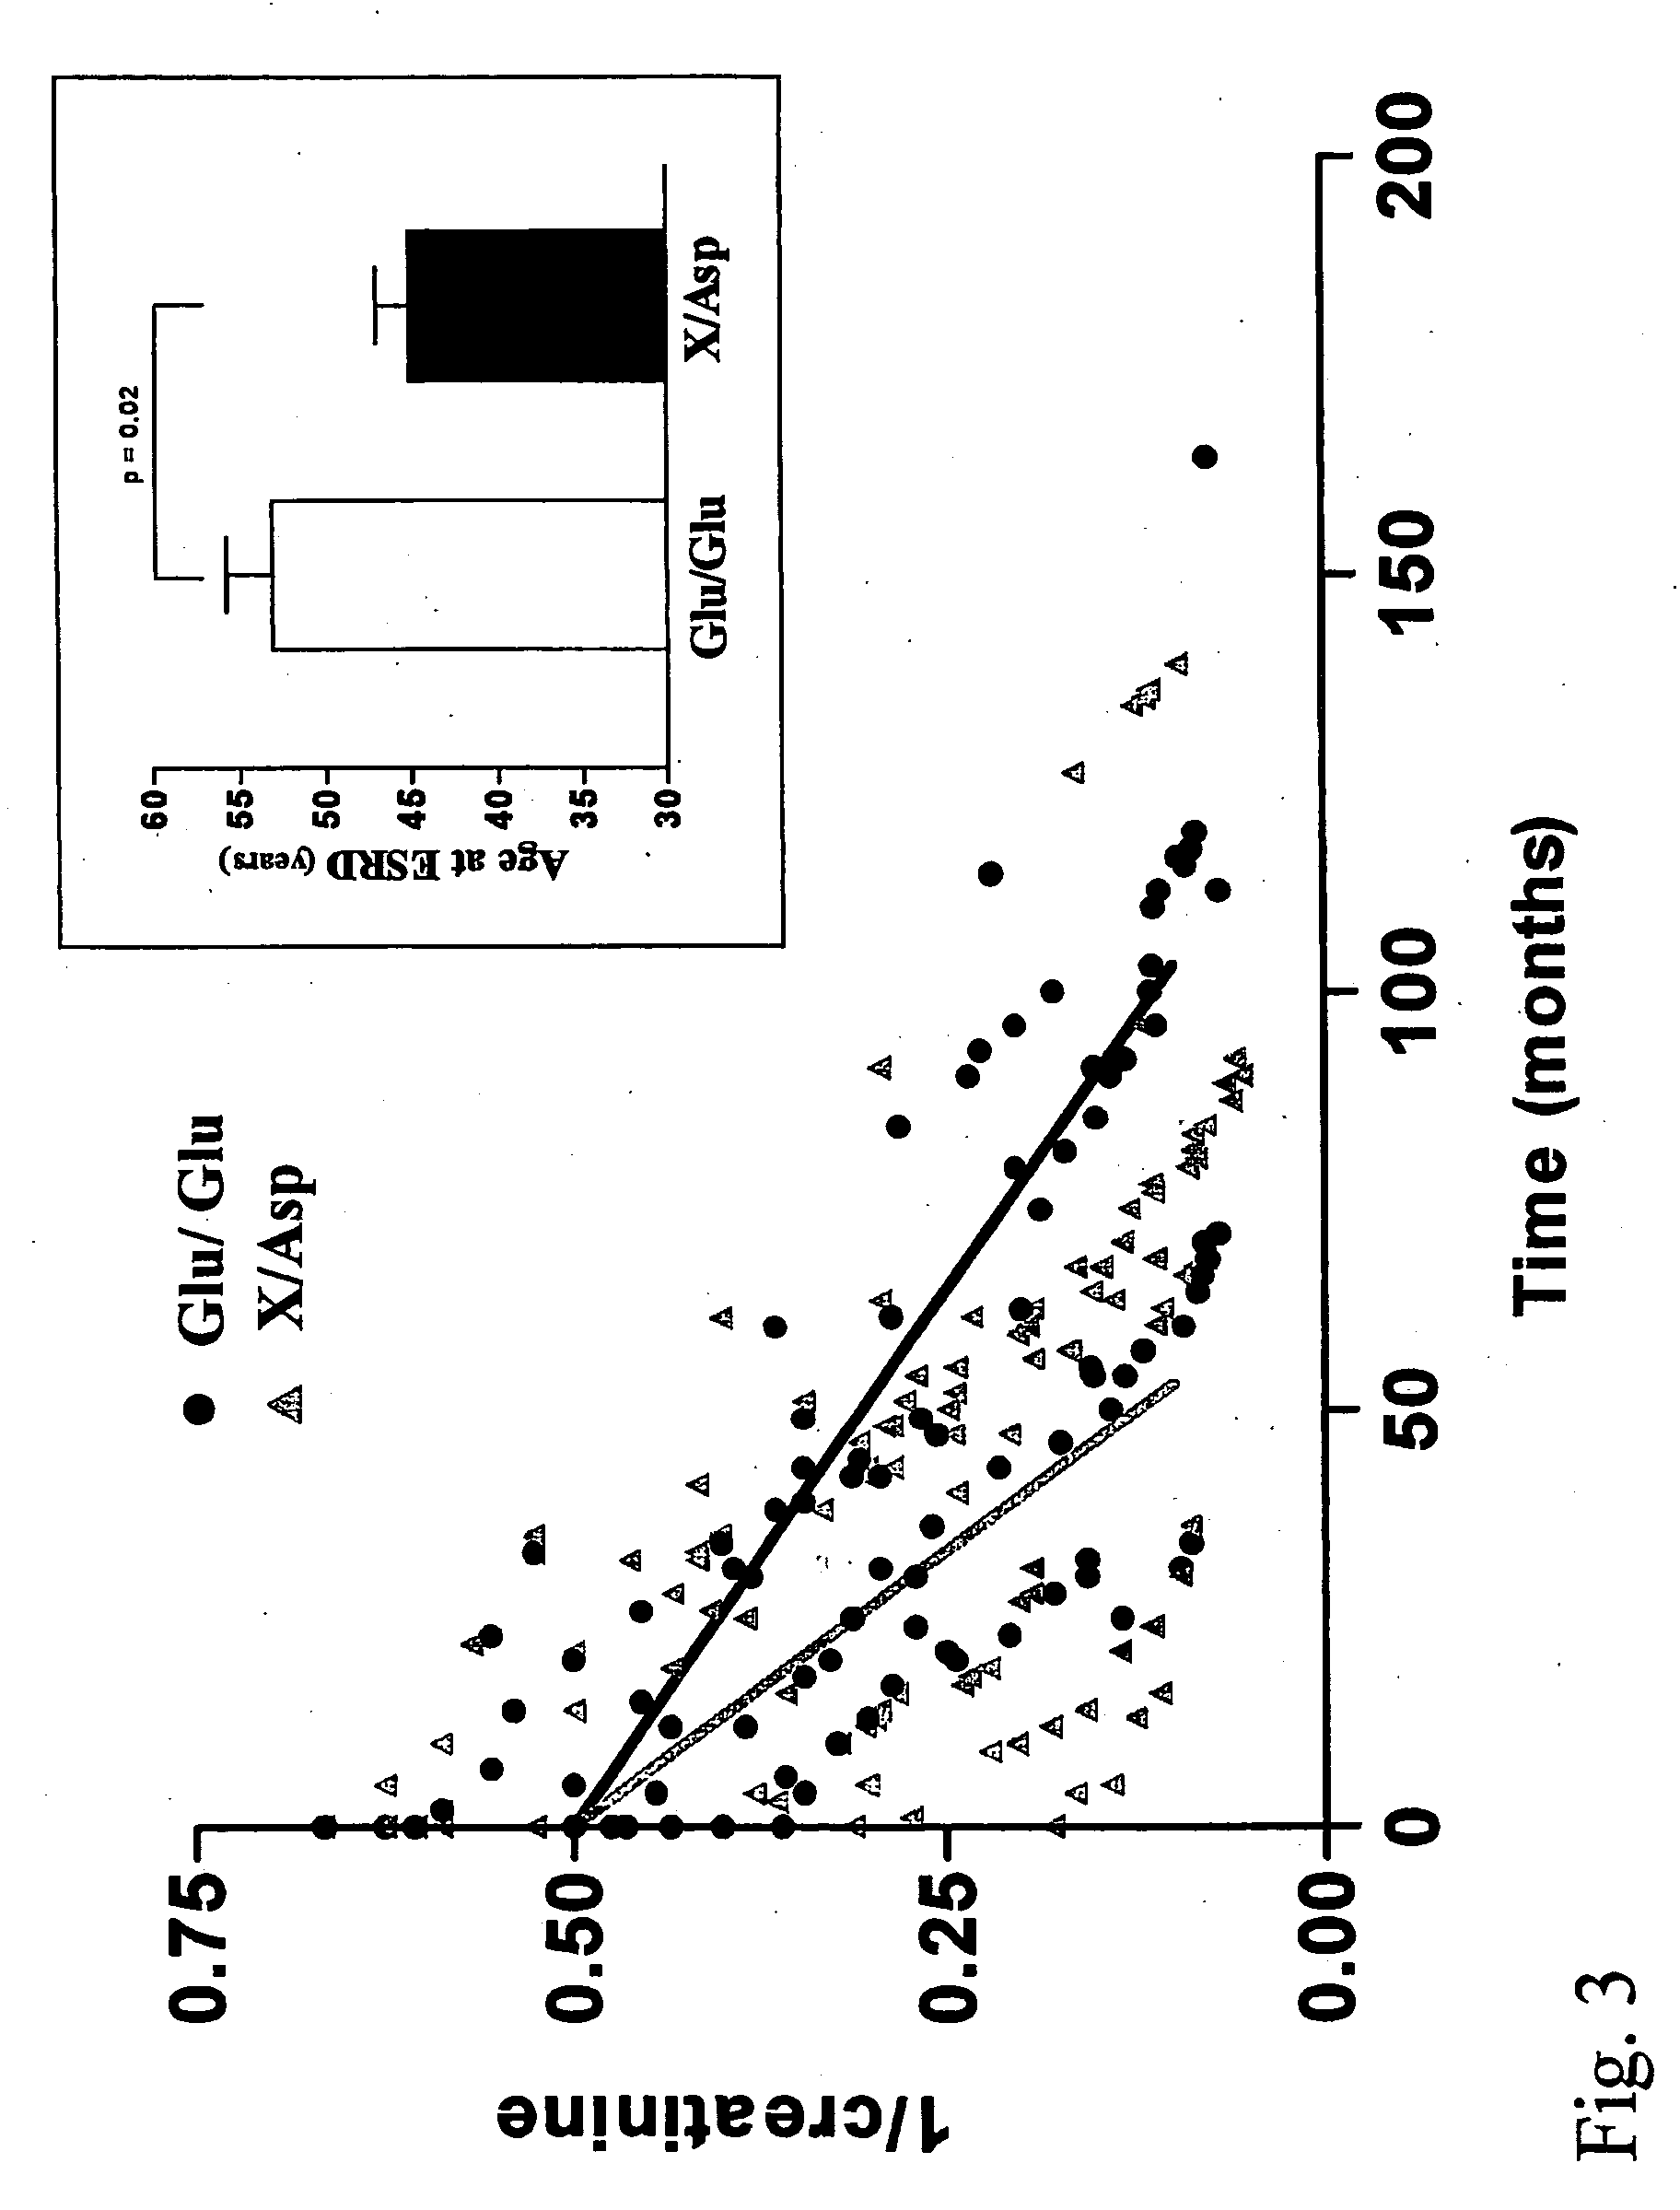 Method for diagnosing and treating predisposition for accelerated autosomal dominant polycystic kidney disease